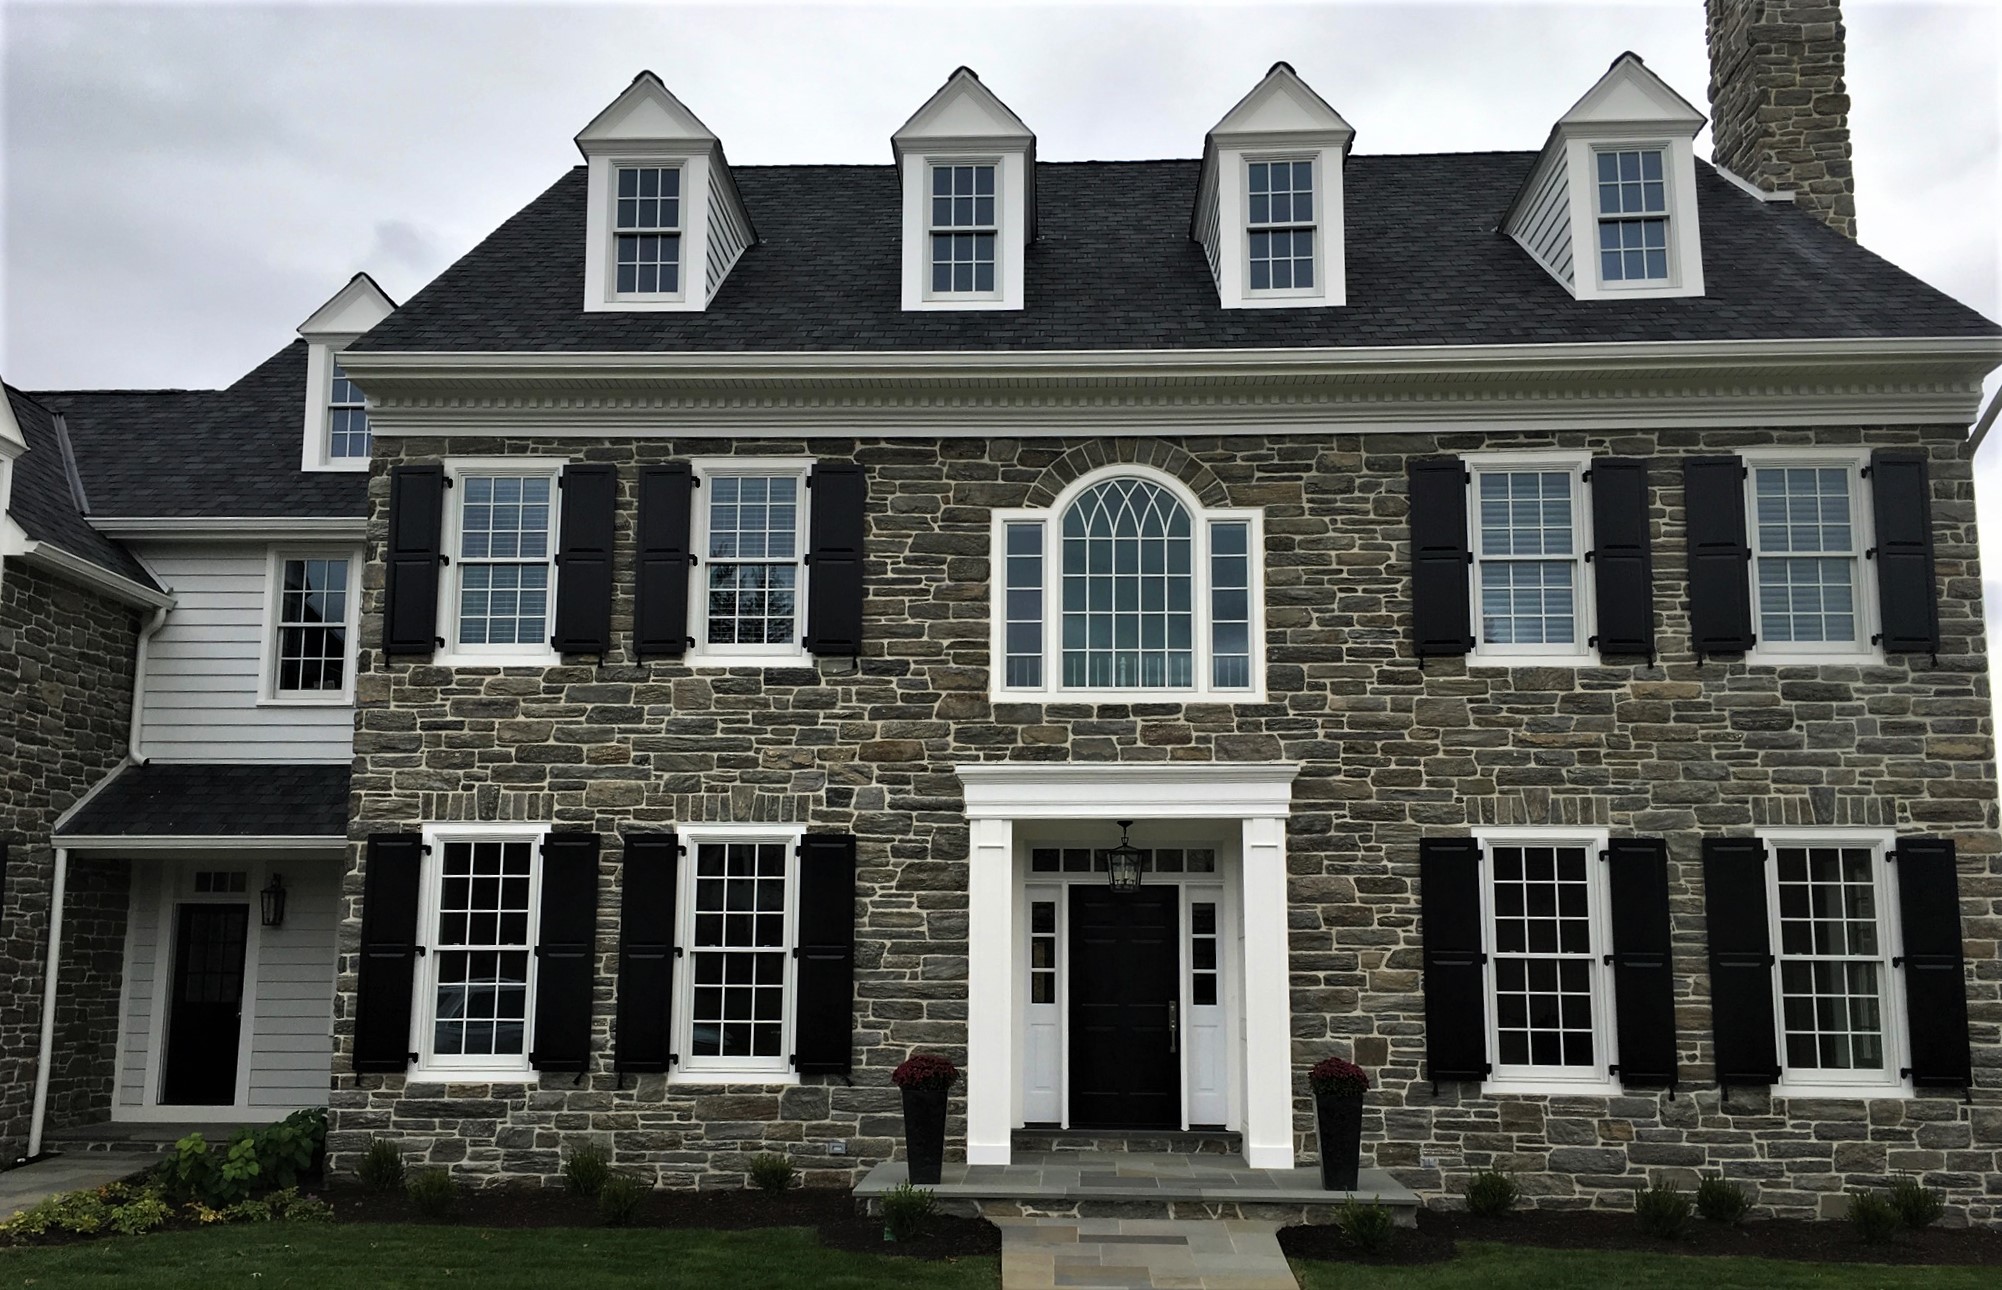 Exterior of a stone home with new windows